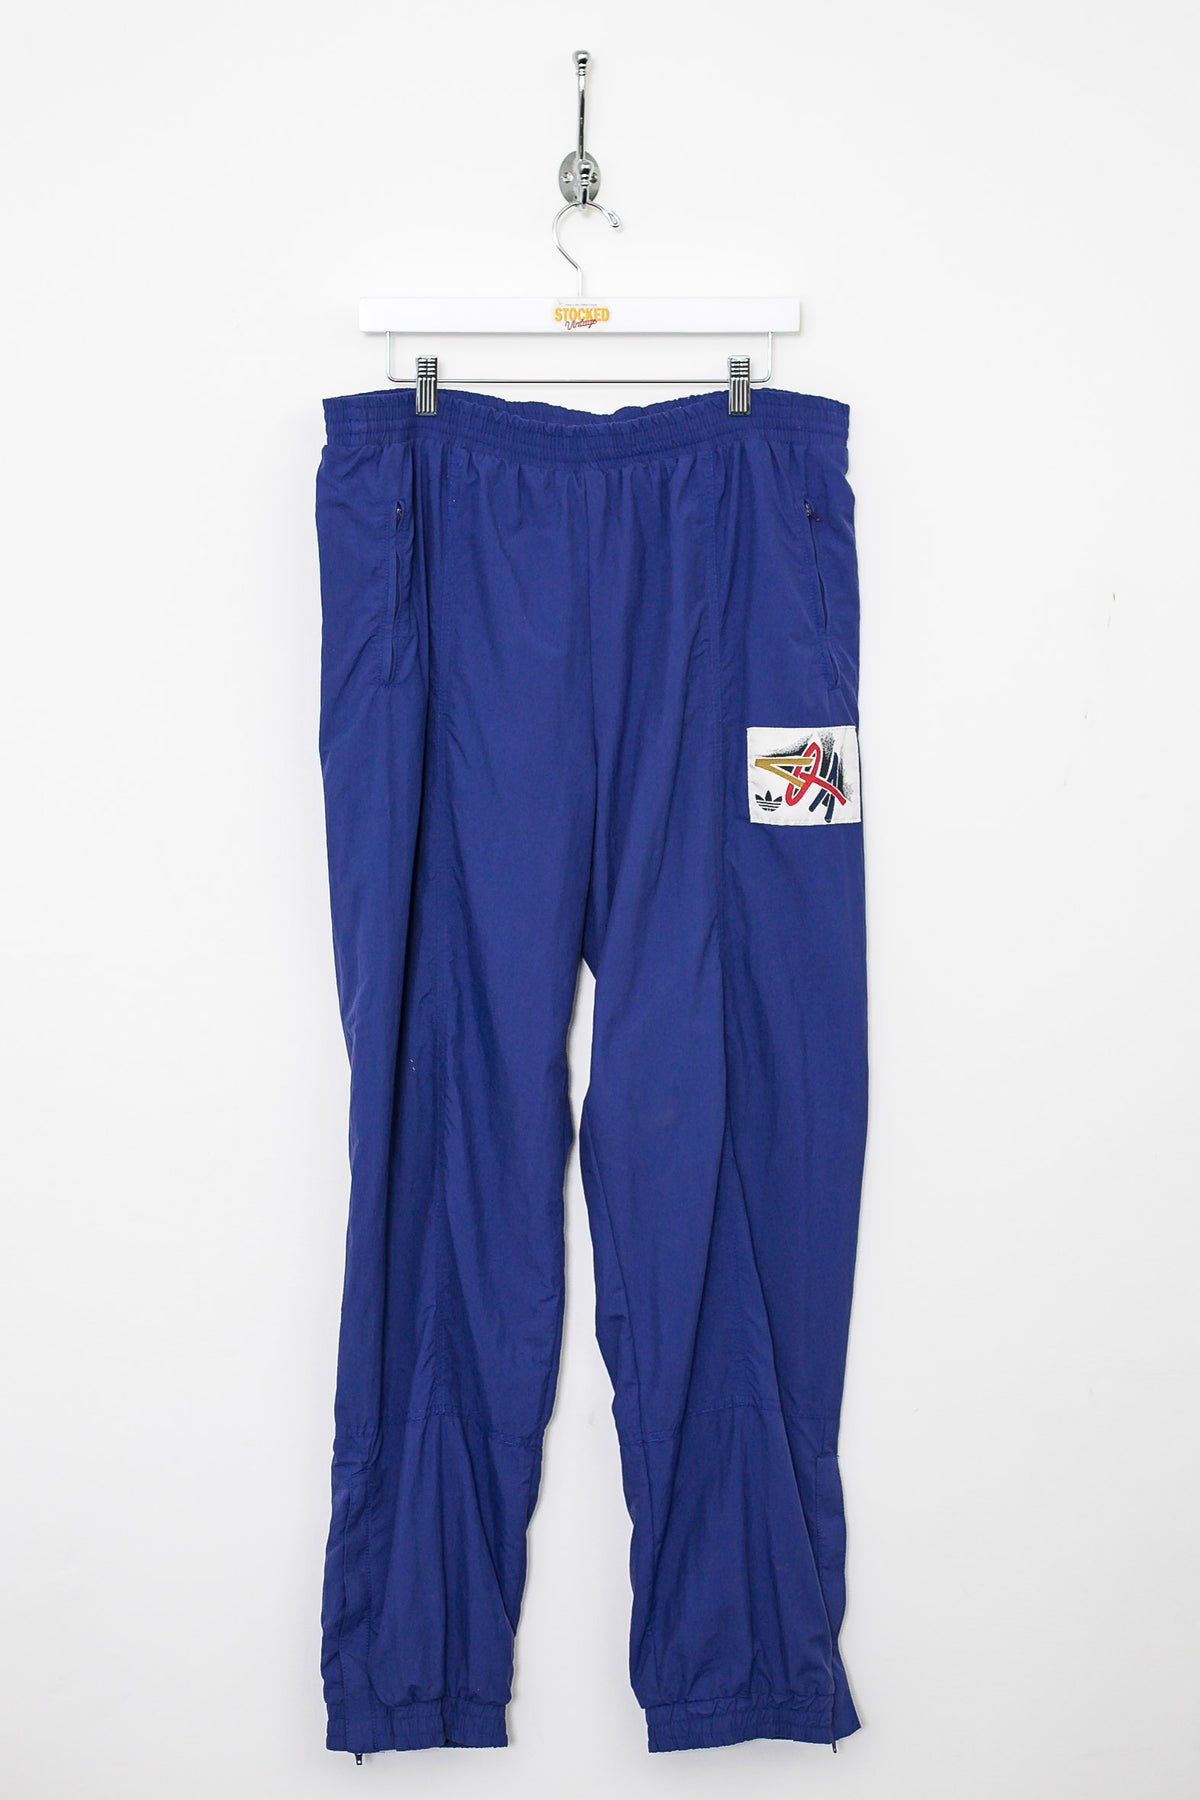 90s Adidas Tracksuit Bottoms (L)